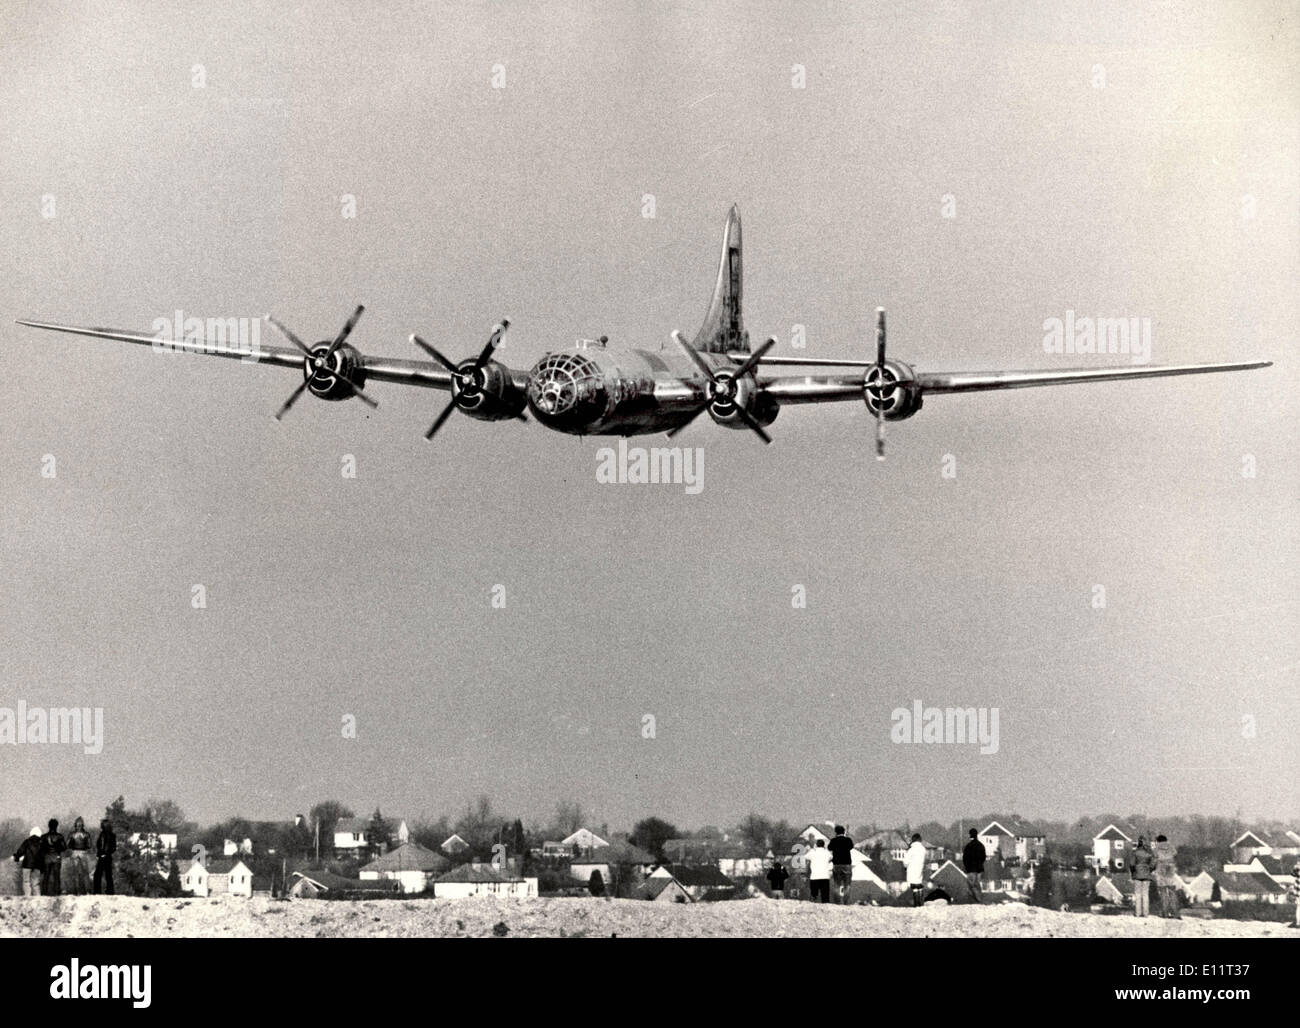 Feb 03, 1980; Cambridge, UK; A B29A Superfortress Whic was taken out of California, flying into the Battle of Britain airfield Duxford, Cambridge. The plane was built in 1945 and now is being placed in the Imperial War Museum.. (Credit Image: KEYSTONE Pictures USA/ZUMAPRESS.com) Stock Photo